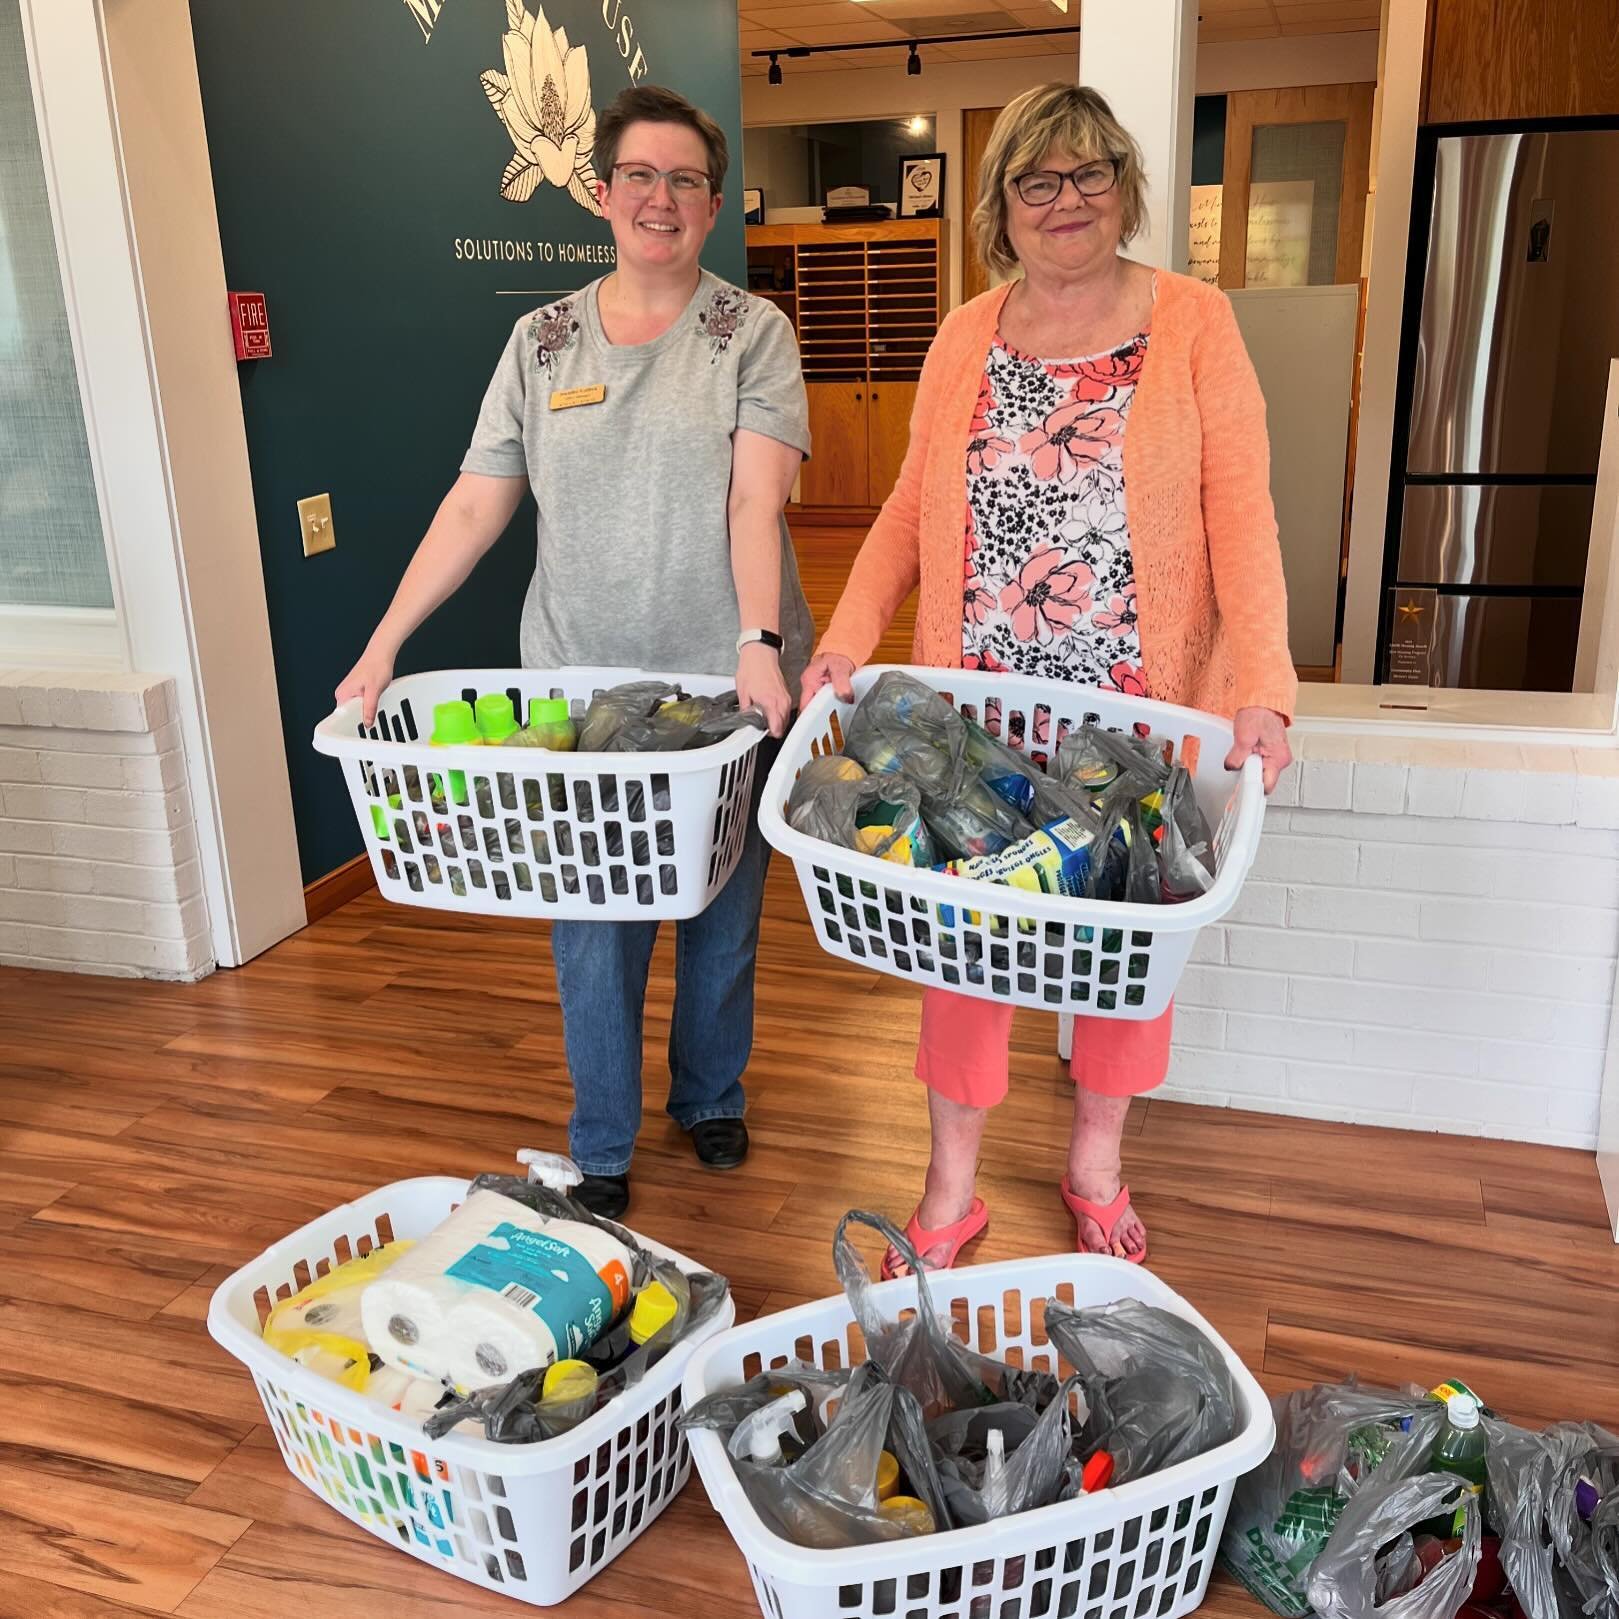 ☀️ The Campbell County Sunnyside Senior Group collected much-needed items from our wishlist for the homeless families we serve! Many thanks to Jenny and all the other members who have contributed&mdash;your kindness and generosity are making a real d